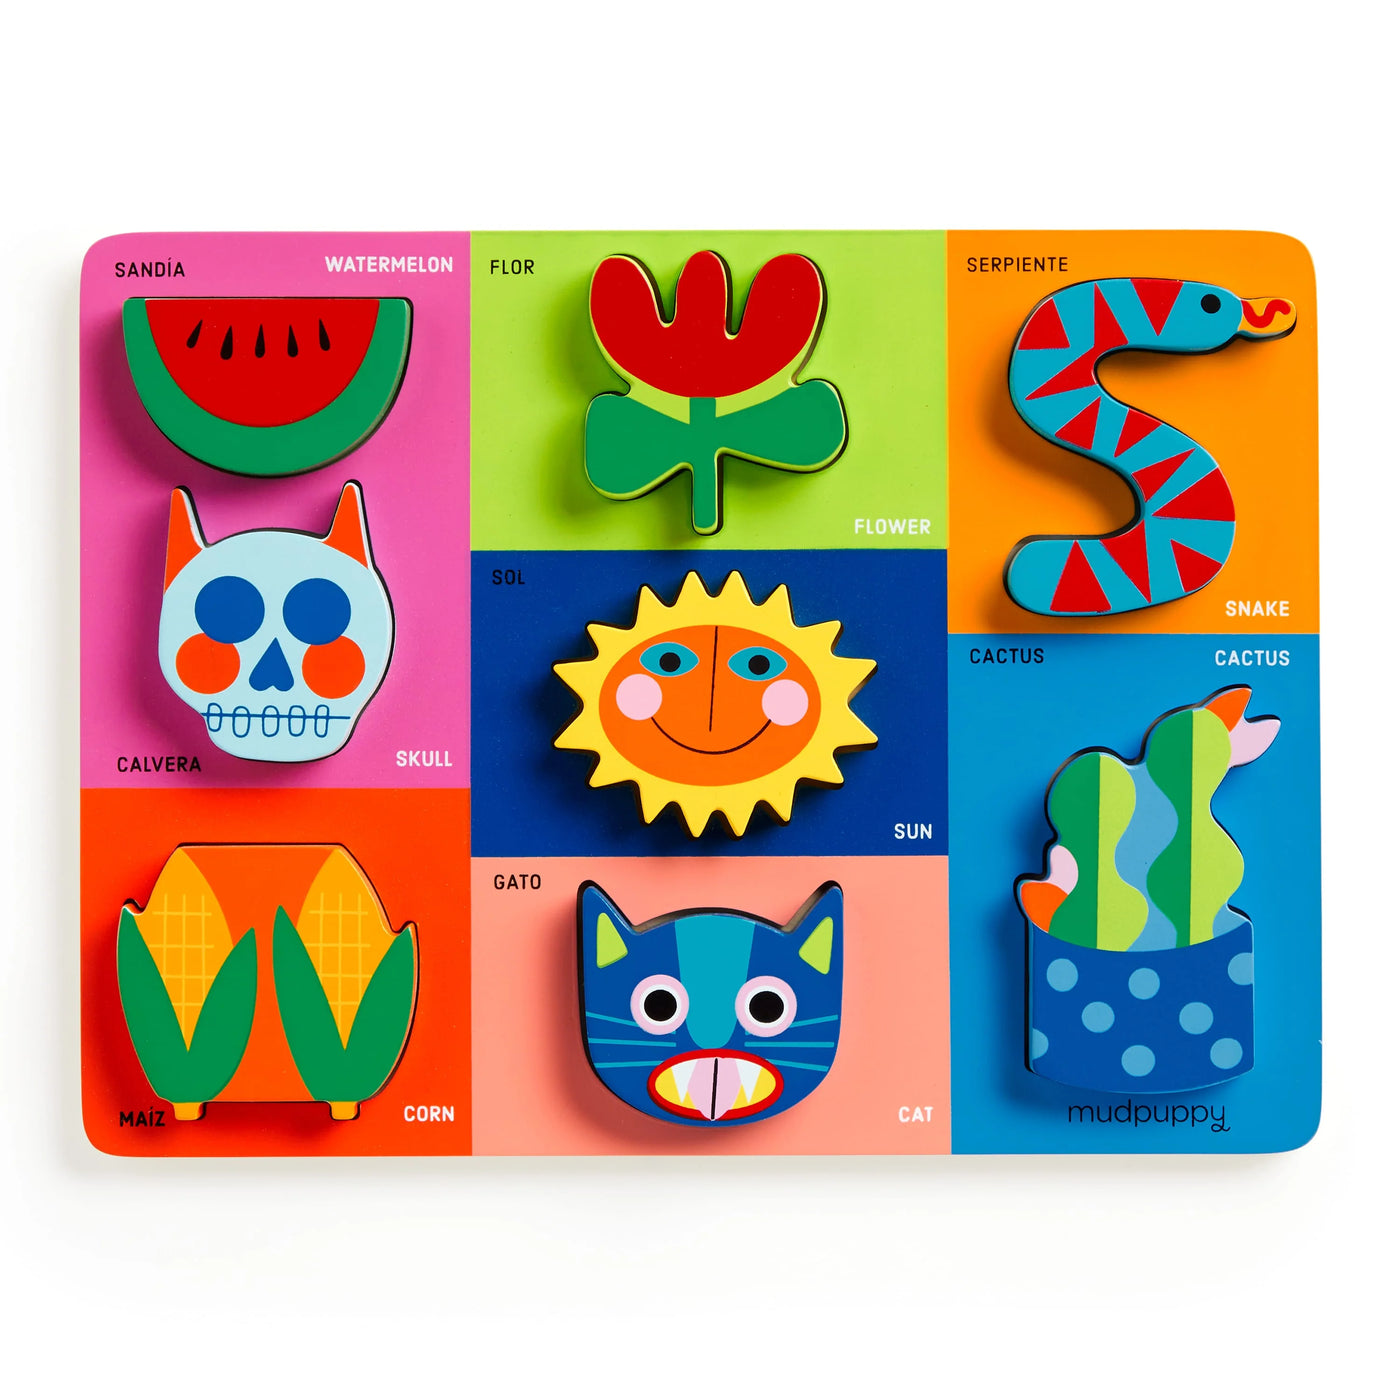 rectangle wooden puzzle that features colorful images of various objects such as a snake, cat and corn.